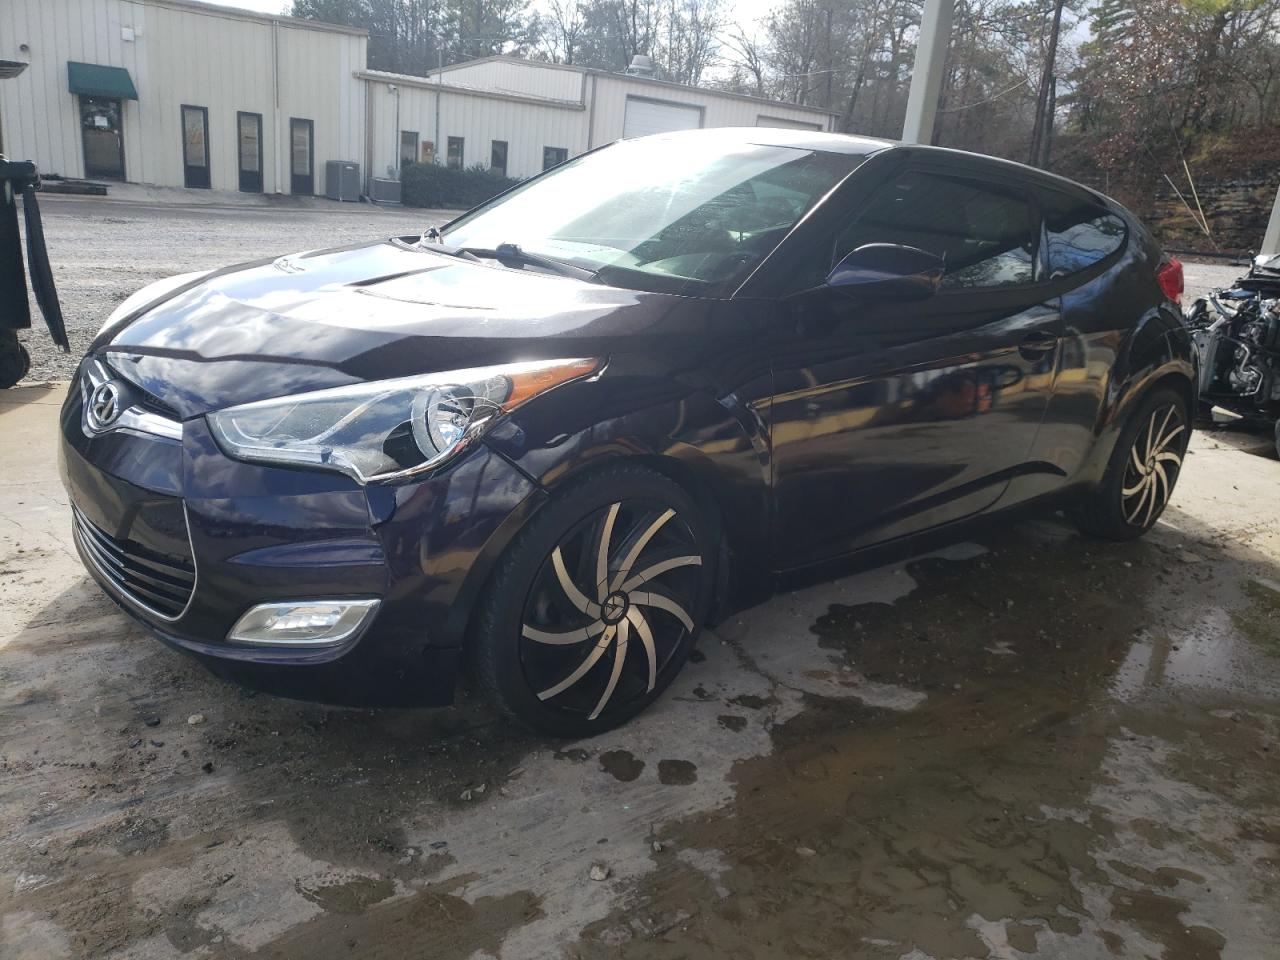 KMHTC6AD4DU****** Salvage and Wrecked 2013 Hyundai Veloster in AL - Hueytown